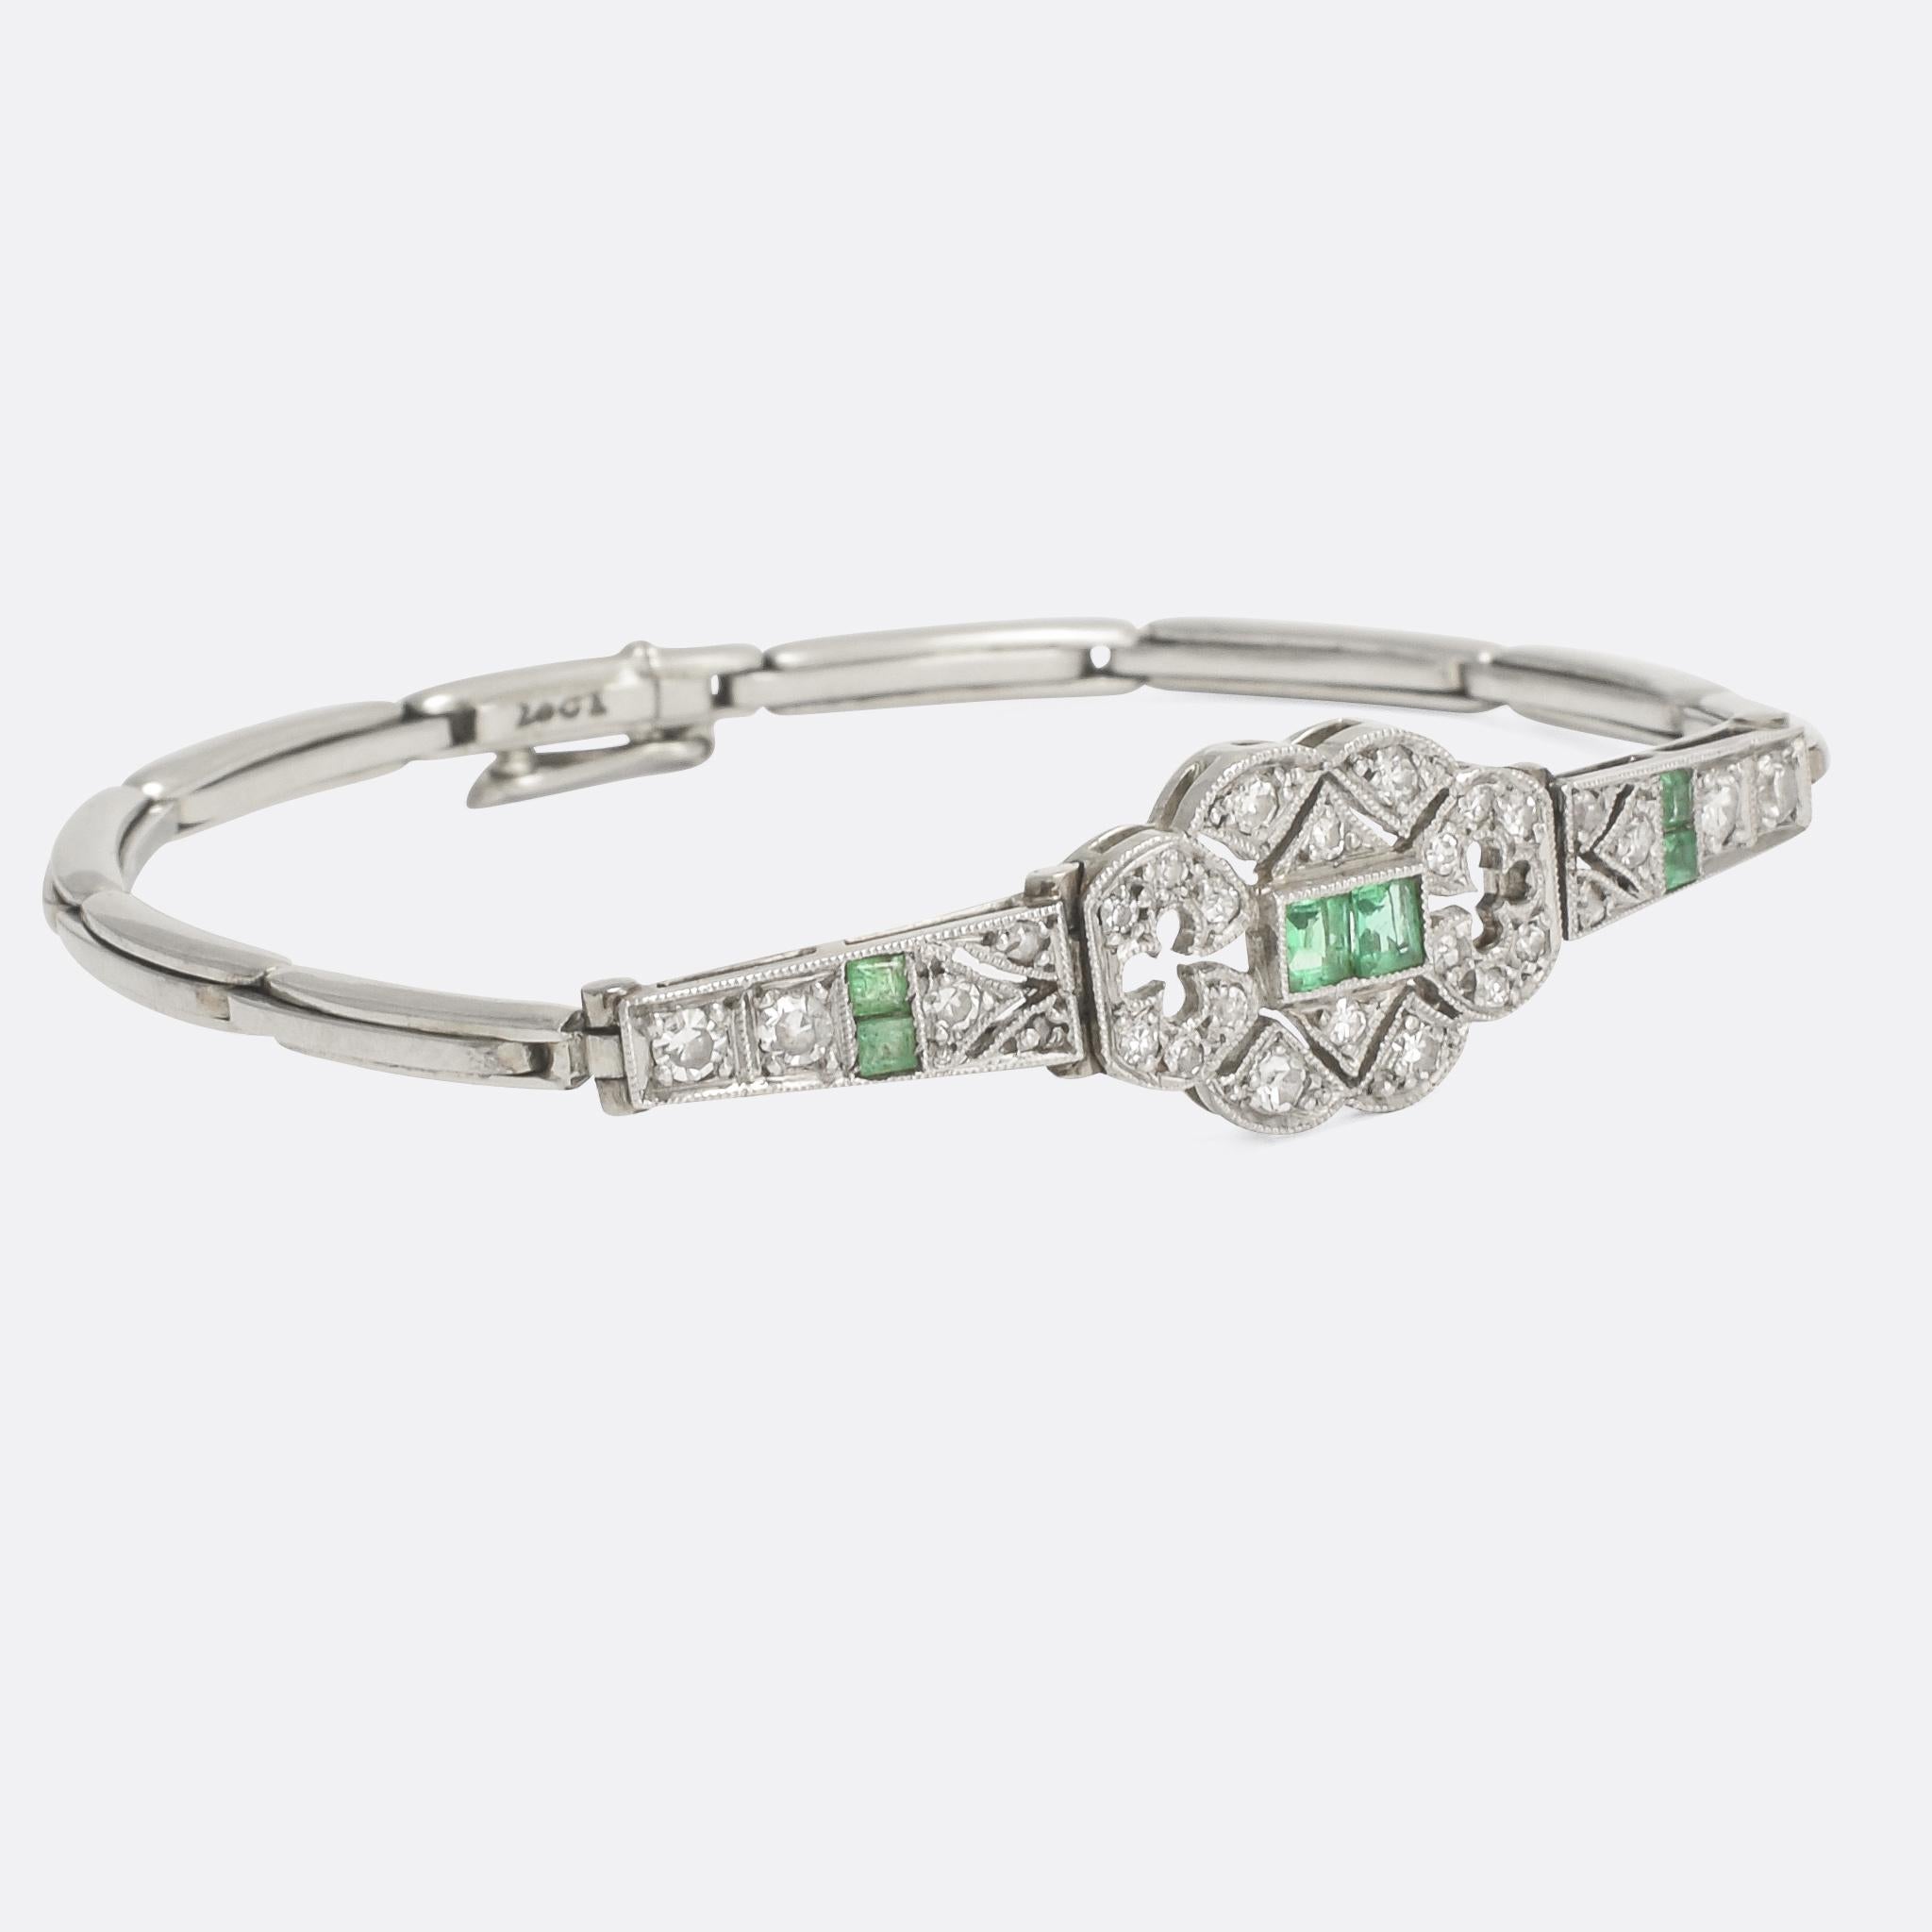 An outstanding Art Deco bracelet set with emeralds and diamond. The head is intricately openworked, with clover / clubs and chevron motifs and finished in lovely millegrain throughout. Modelled in 18 karat white gold with platinum settings, it's